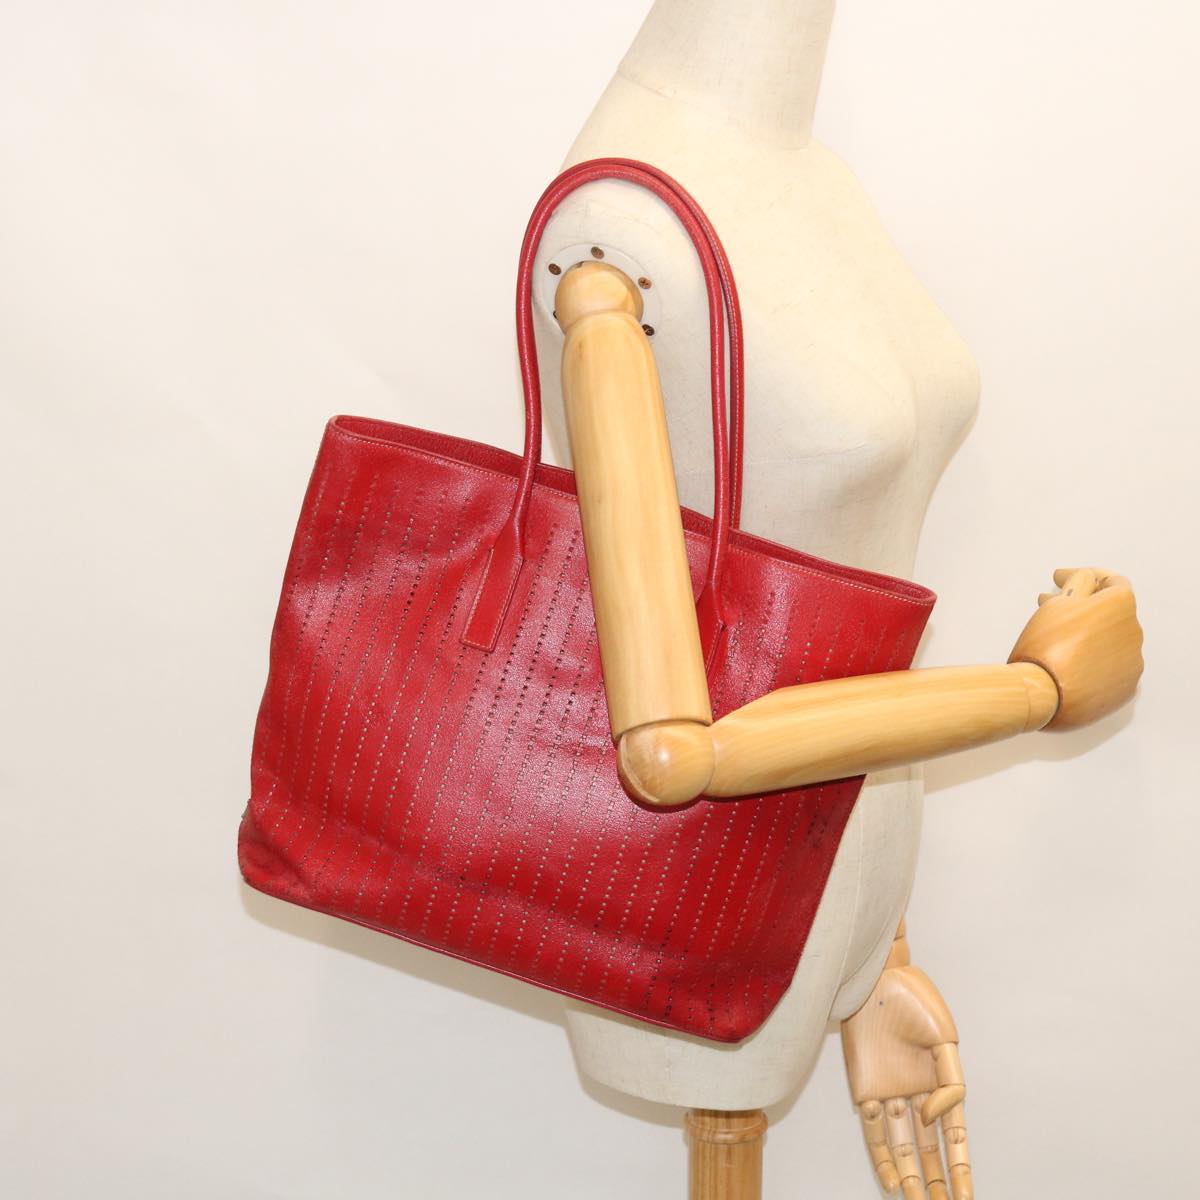 PRADA Tote Bag Leather Red Auth bs7661